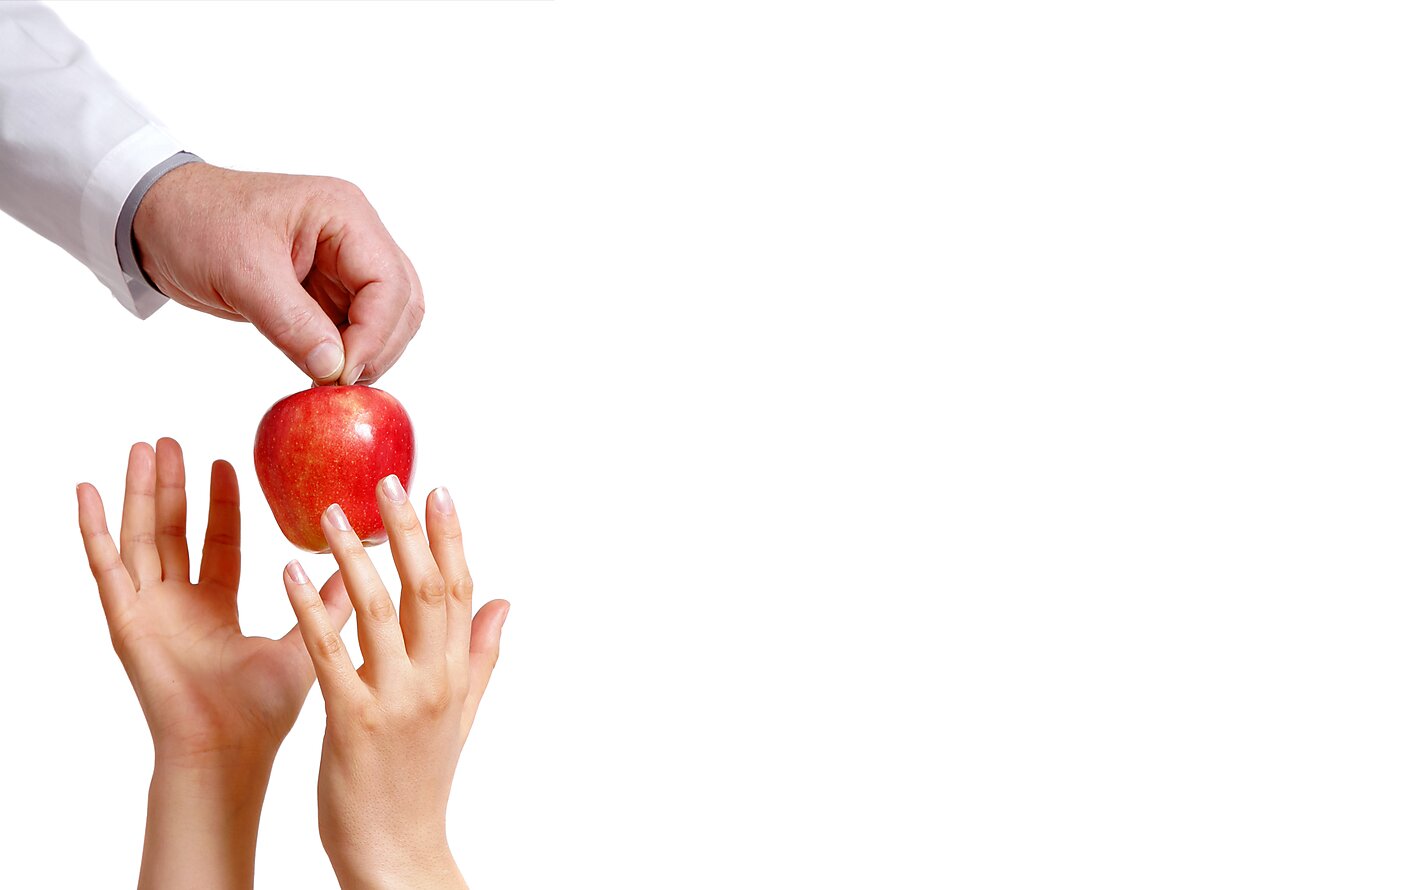 A doctor placing an apple into the hands of a patient.